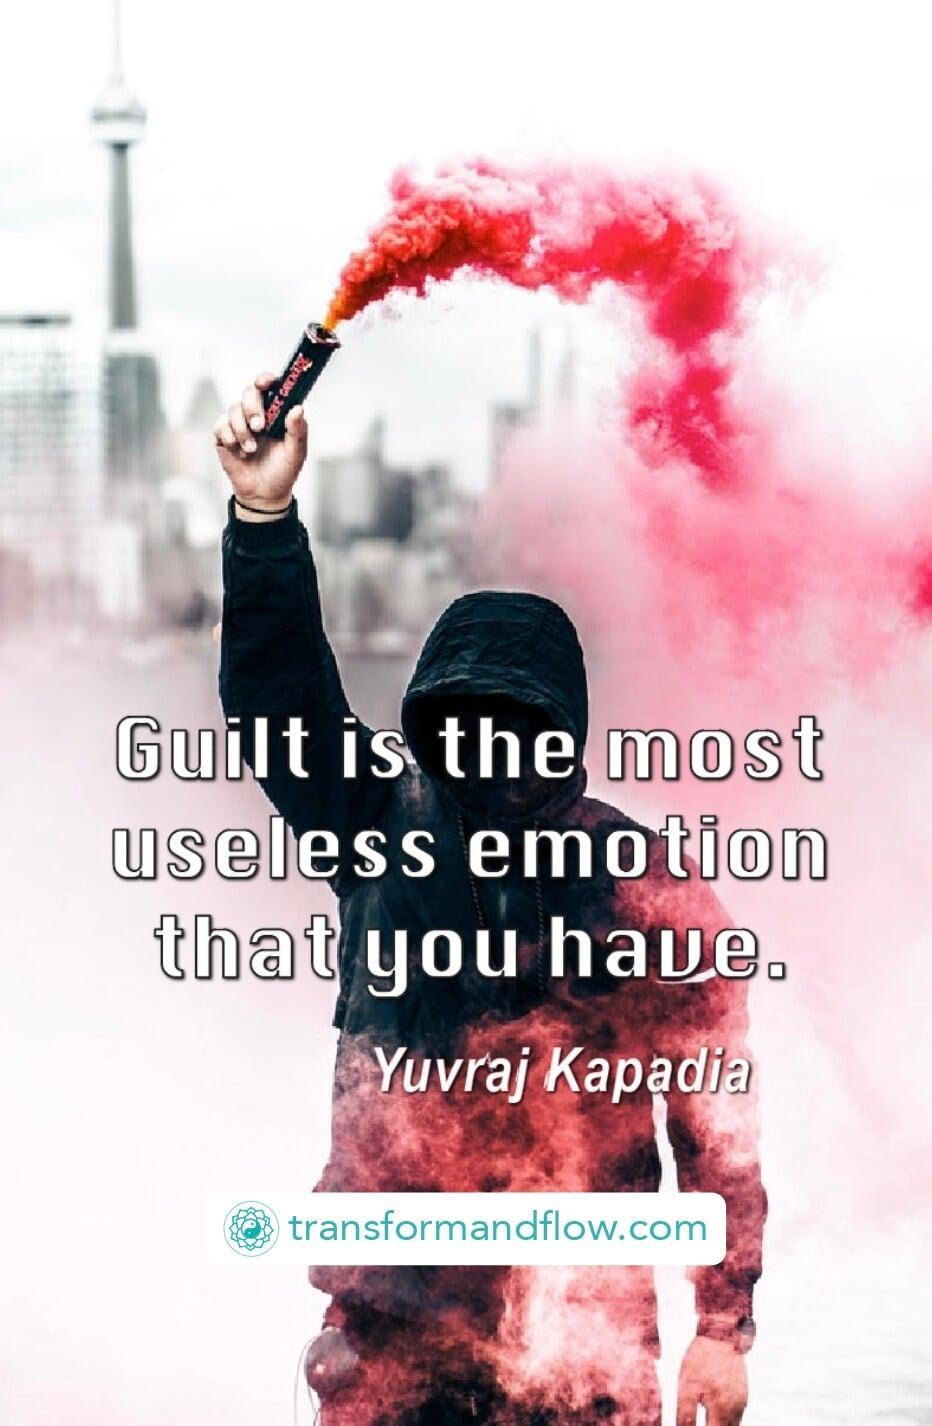 Guilt is the most useless emotion that you have - Yuvraj Kapadia